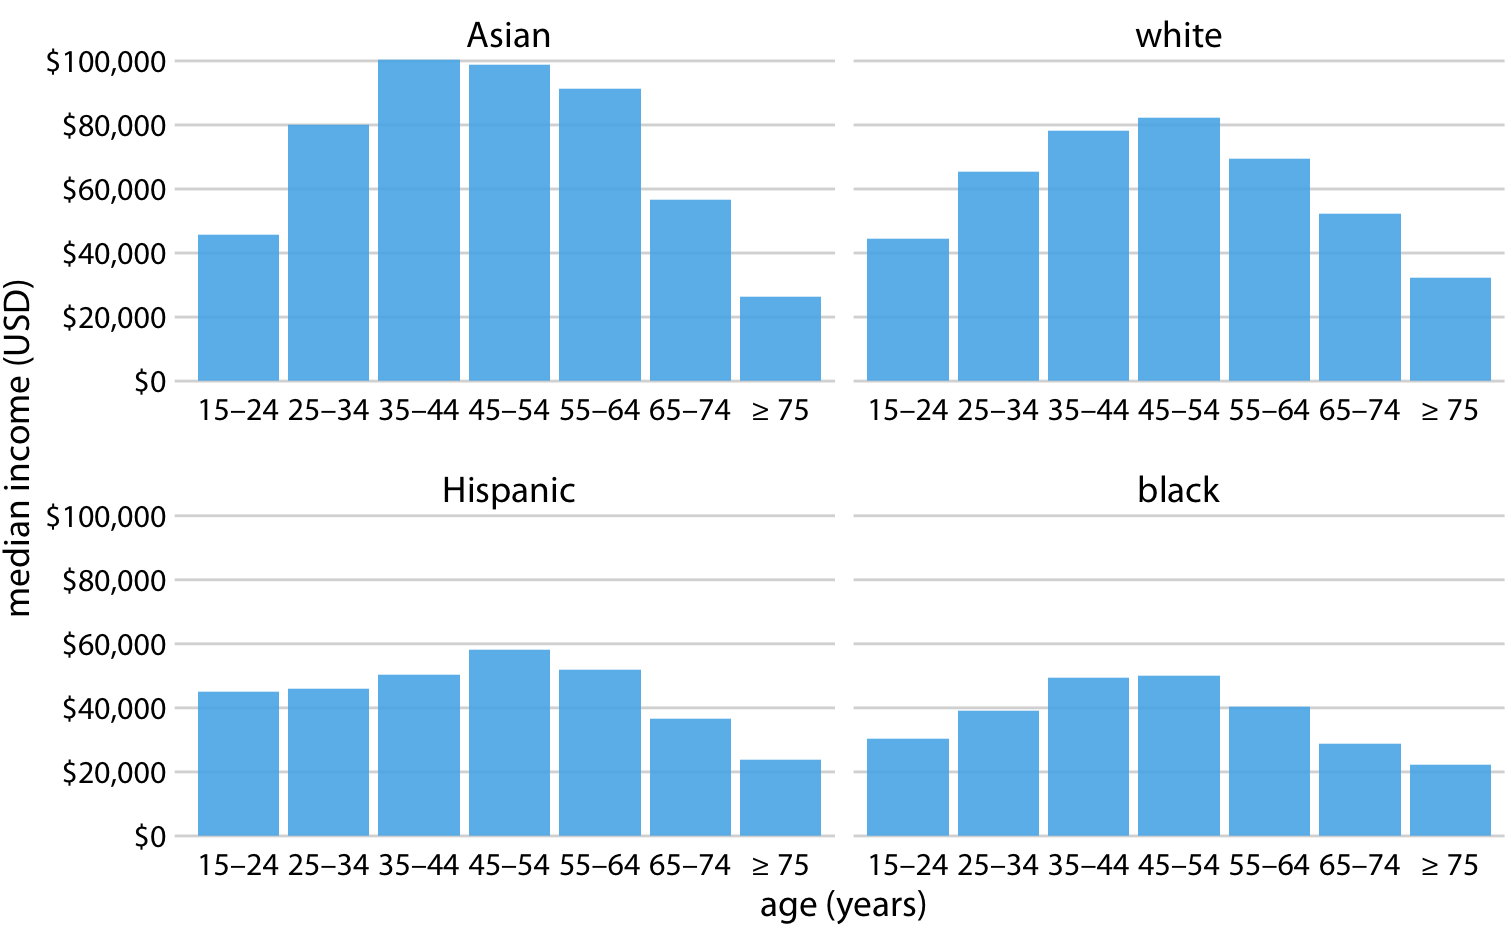 2016 median U.S. annual household income versus age group and race. Instead of displaying this data as a grouped bar plot, as in Figures 6.7 and 6.8, we now show the data as four separate regular bar plots. This choice has the advantage that we don’t need to encode either categorical variable by bar color. Data source: United States Census Bureau